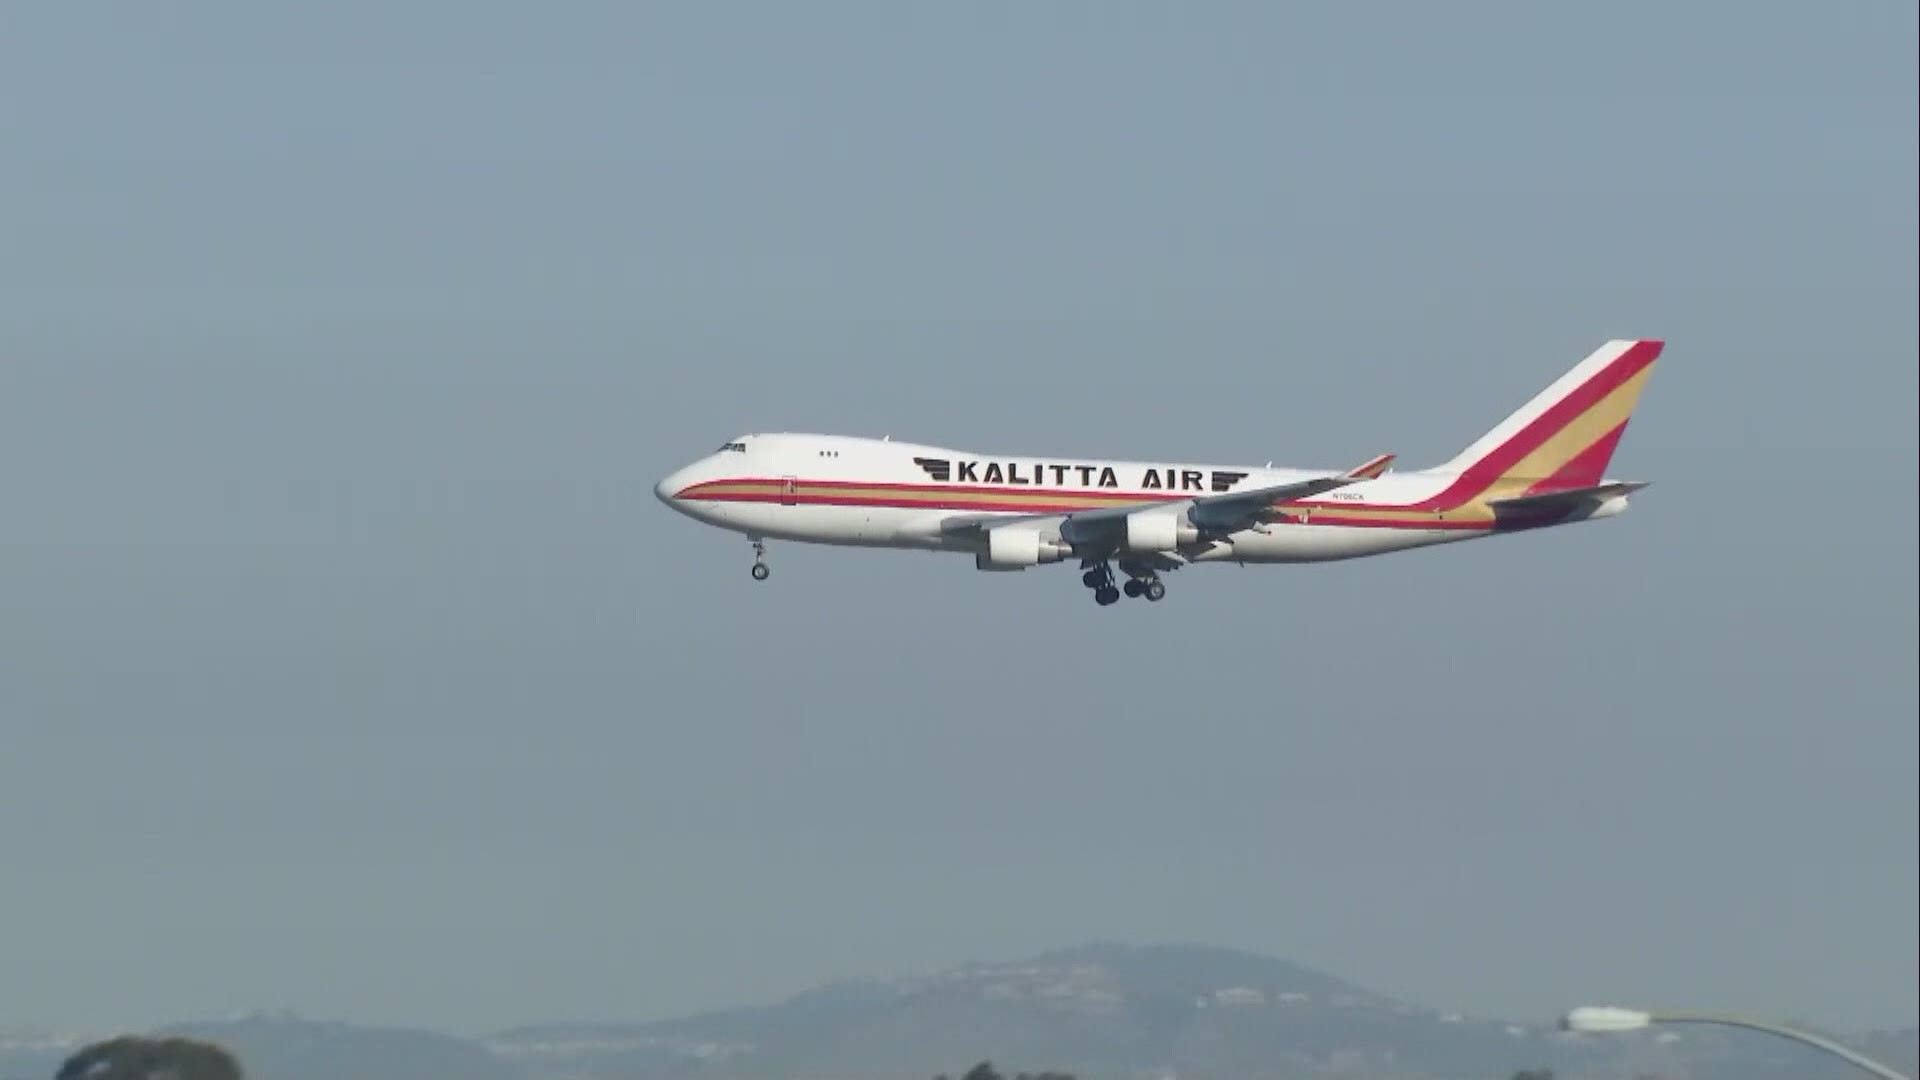 The plane landed at MCAS Miramar shortly before 8:50 a.m. It was not immediately clear how many passengers were aboard.